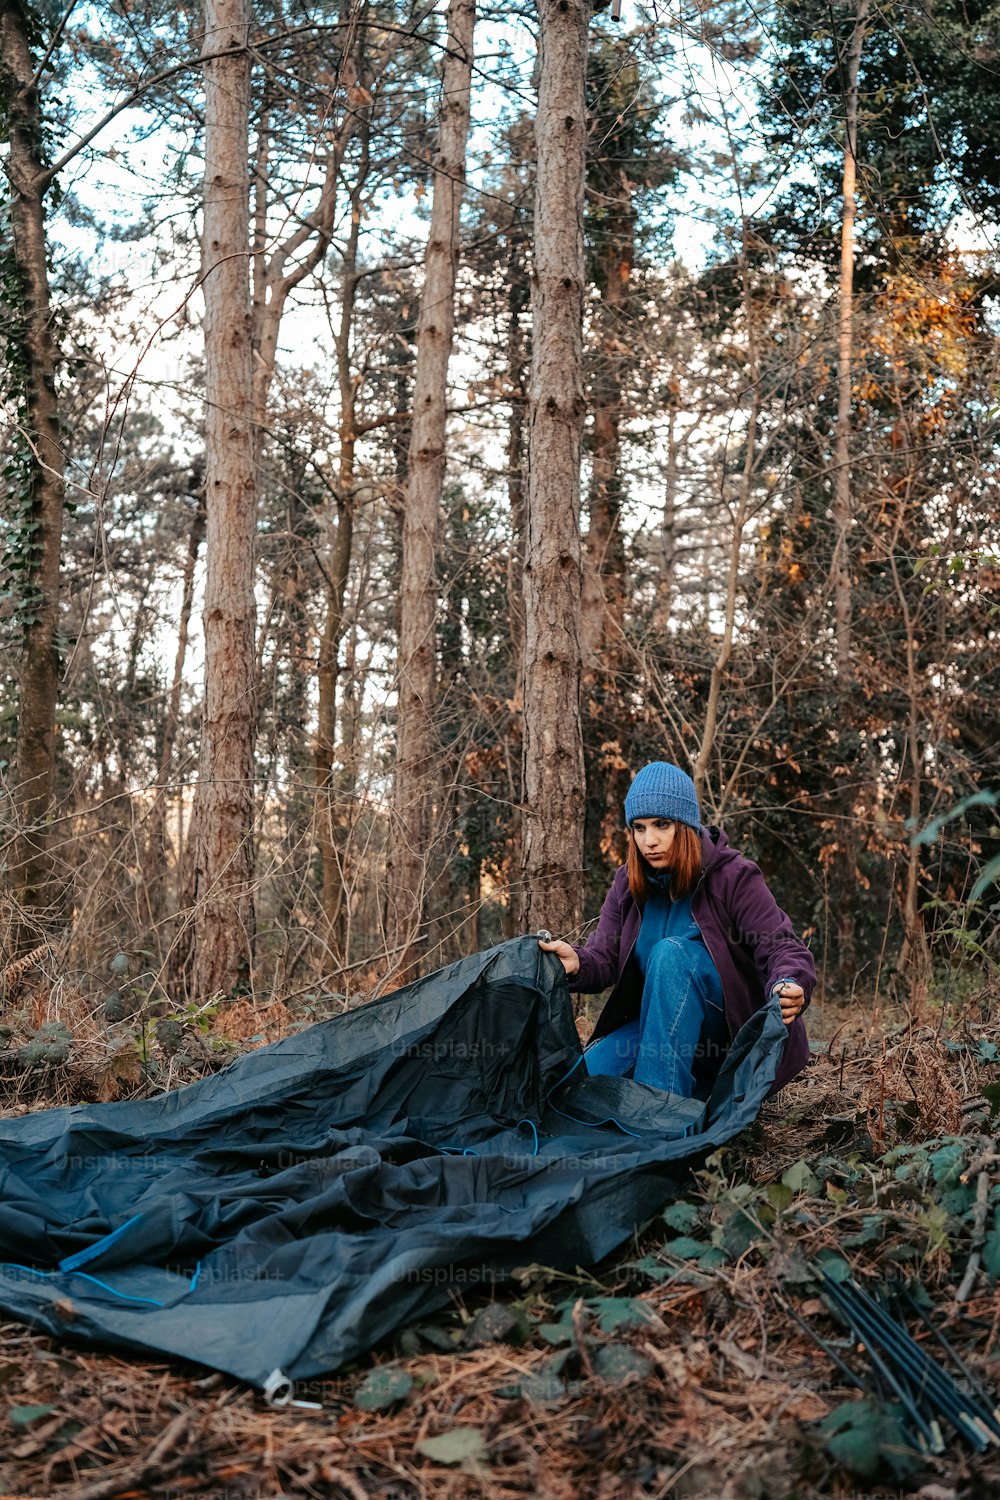 a woman sitting on the ground next to a tarp in the woods